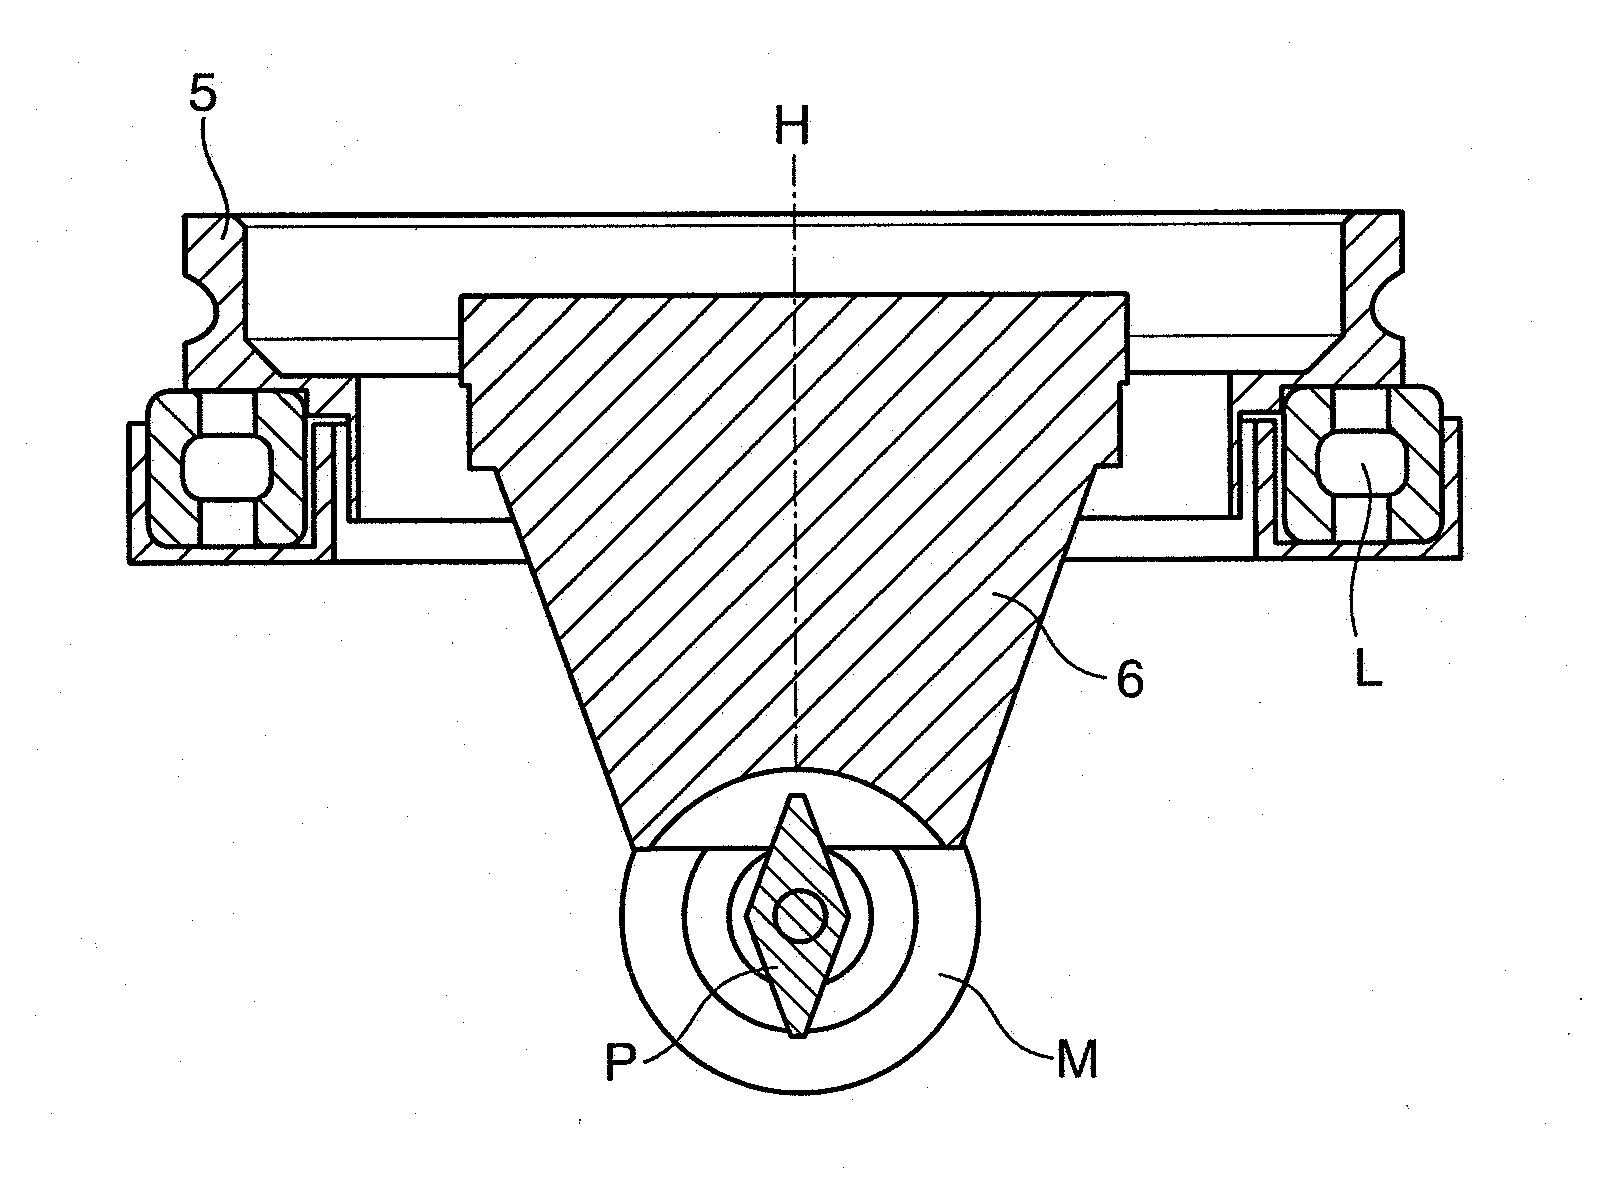 Device for cleaning optical measurement bodies that have an area for contact with the surface of the eye